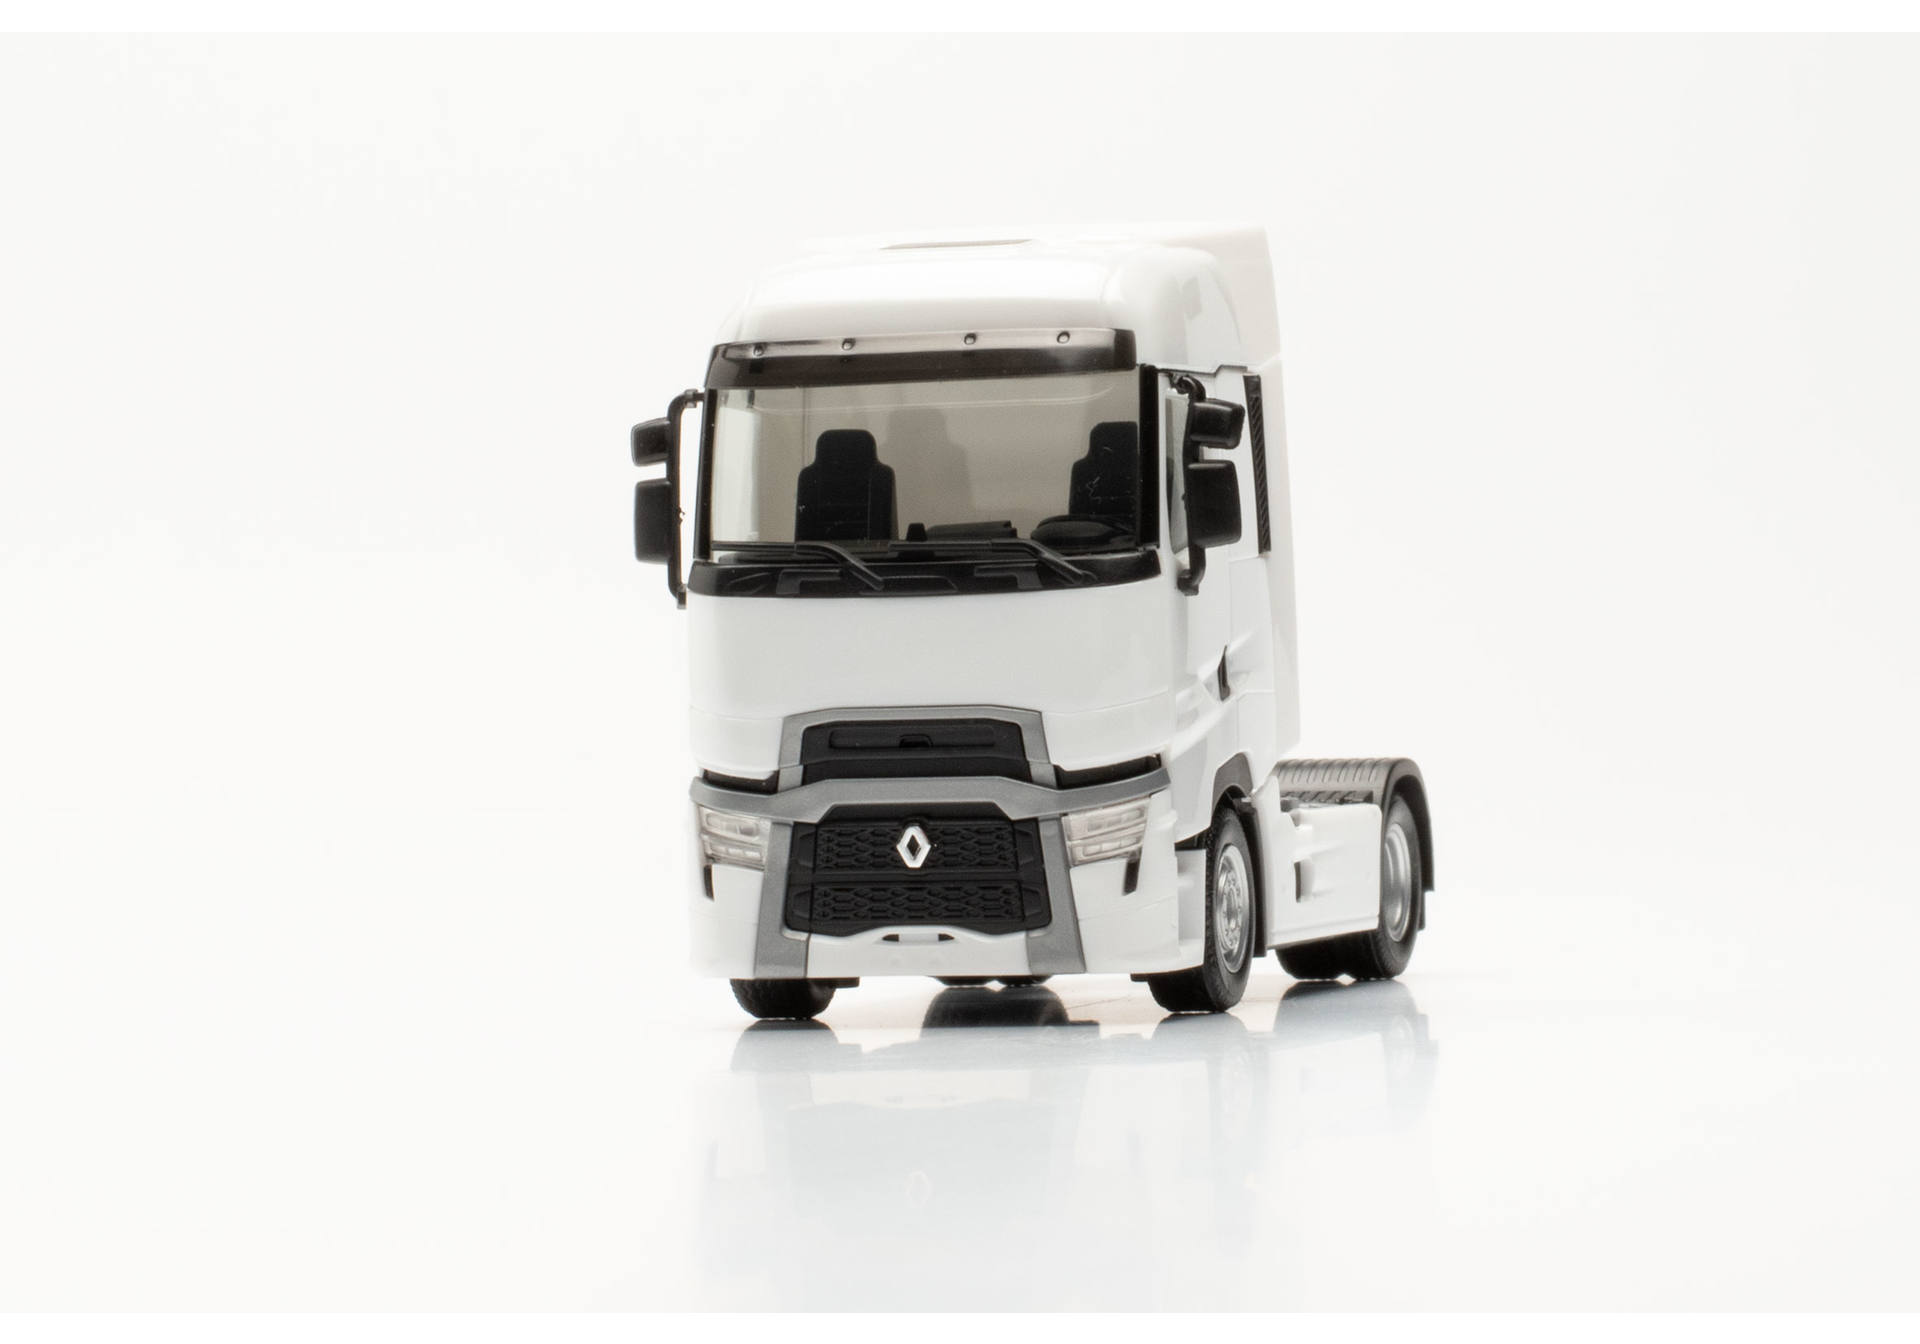 Renault T facelift tractor, white